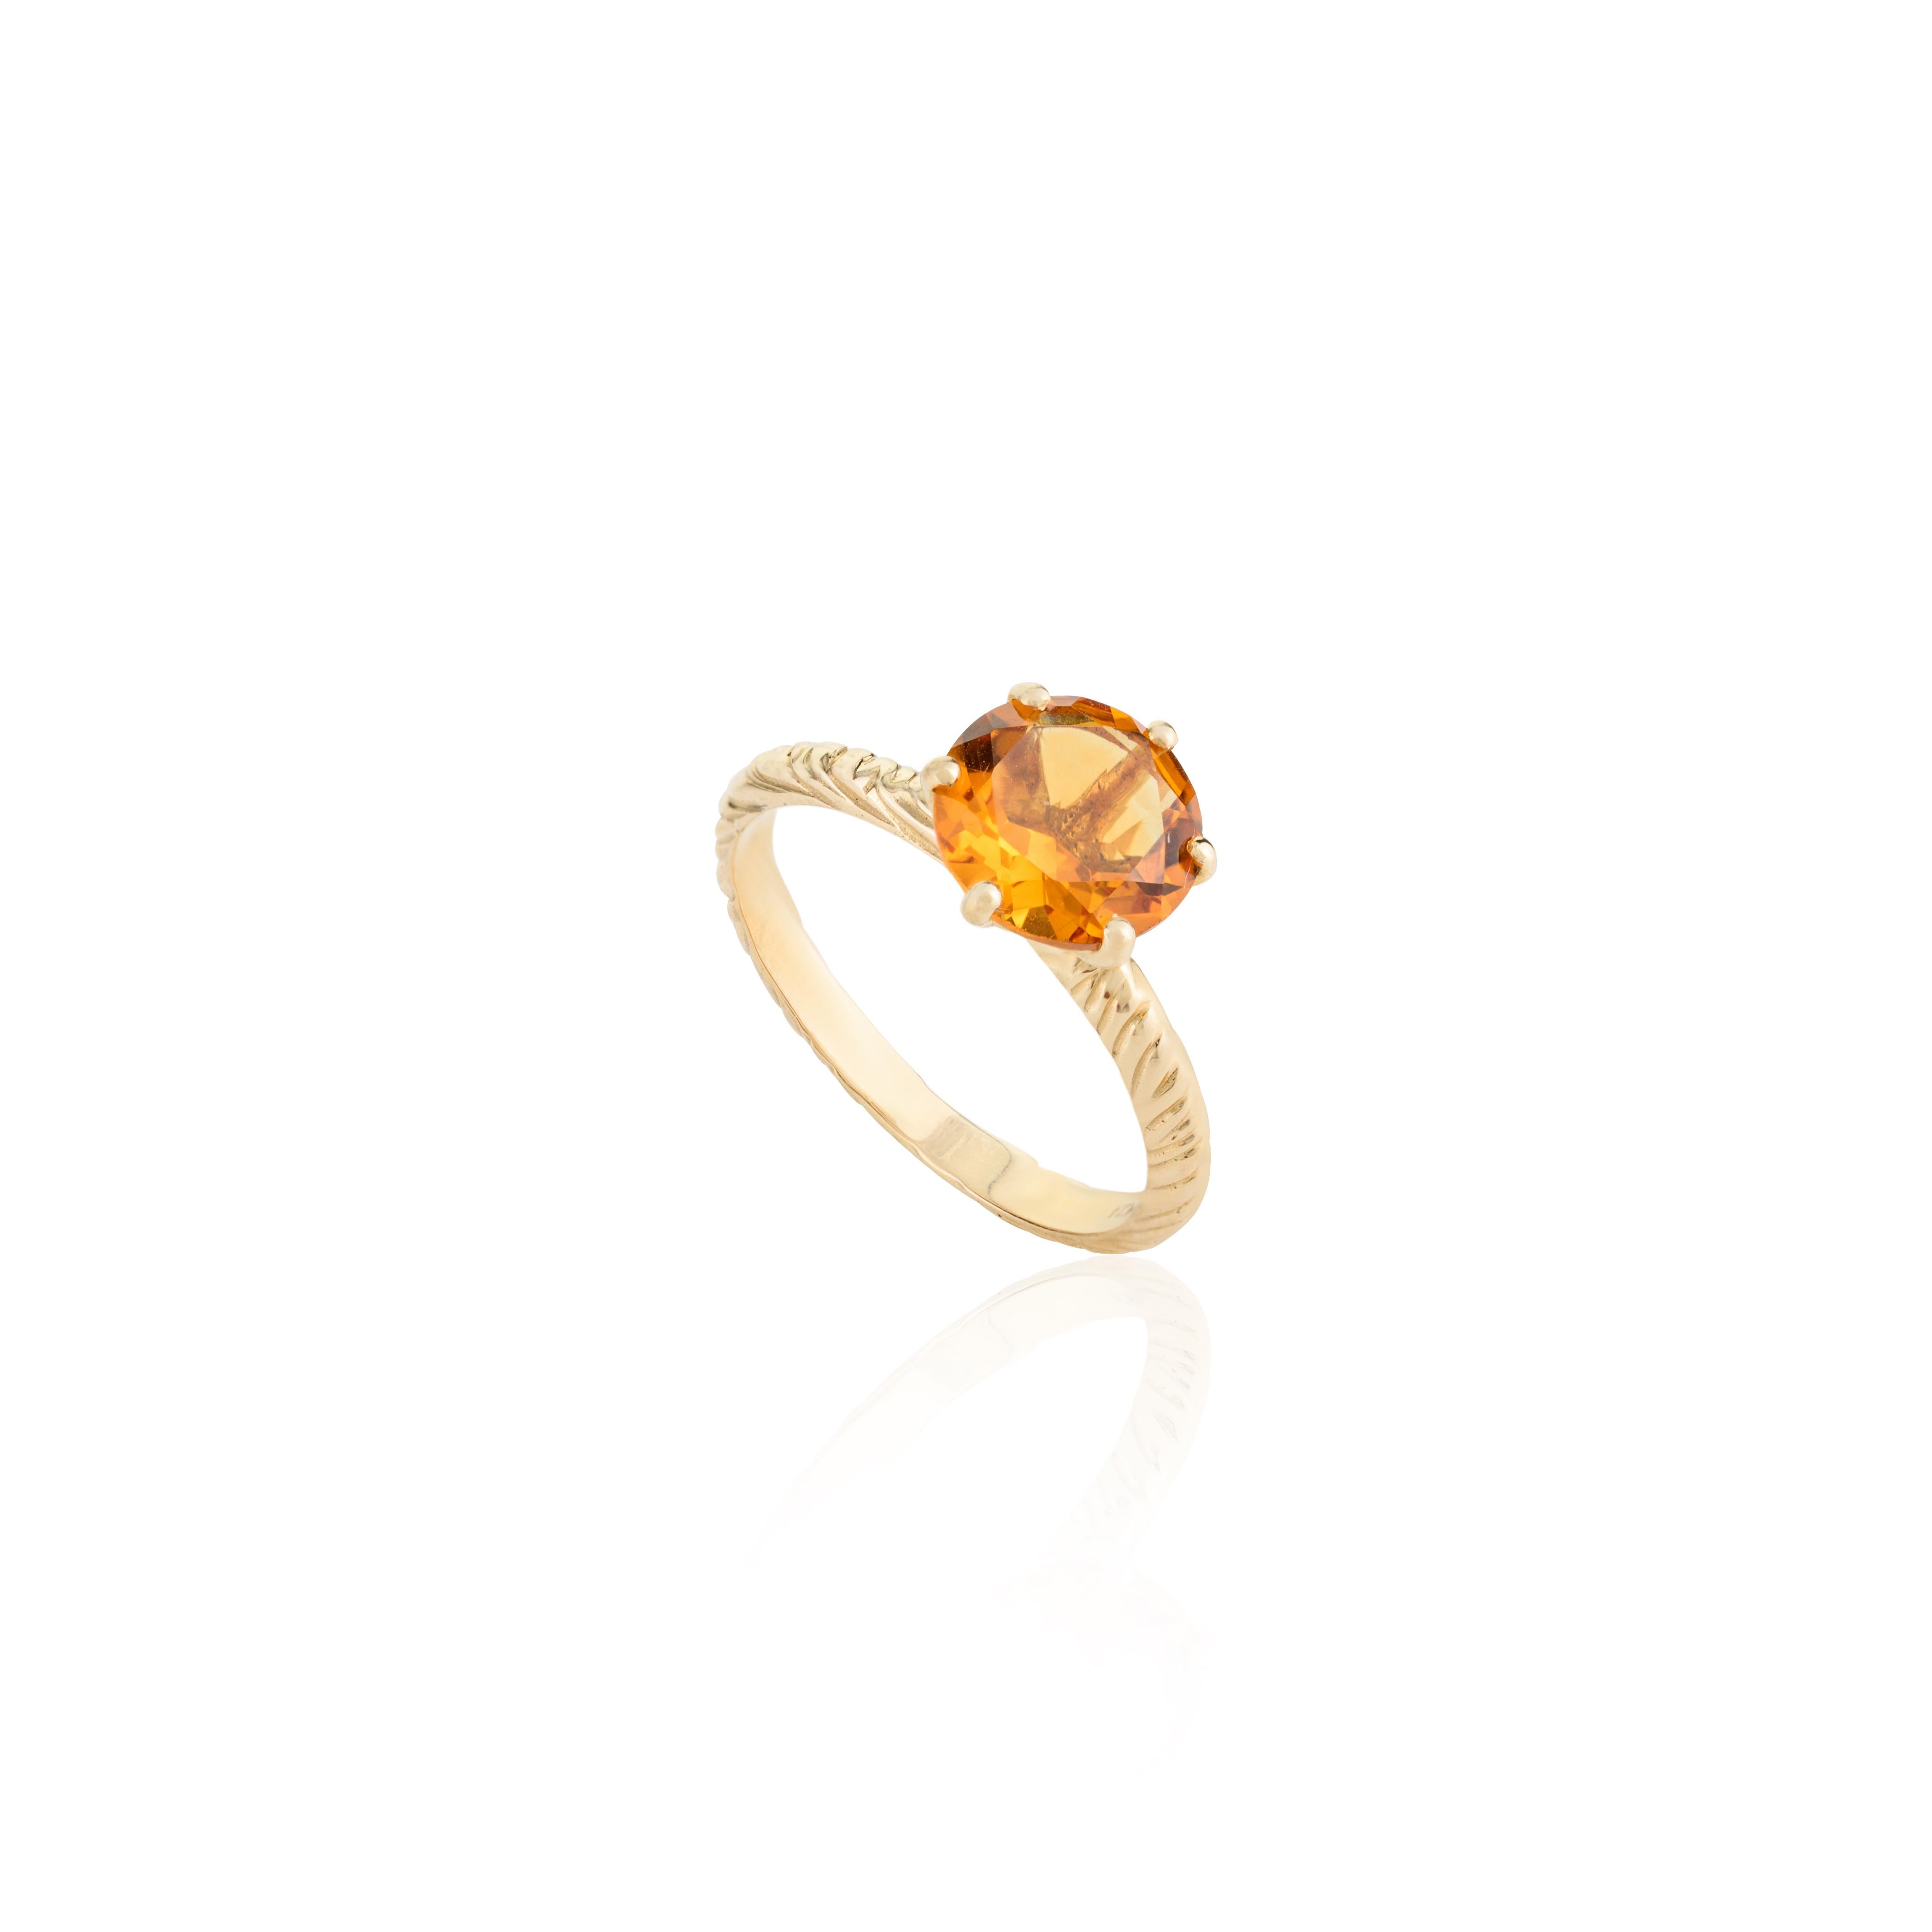 For Sale:  Round Cut Citrine Gemstone Solitaire Ring in 14k Solid Yellow Gold 8